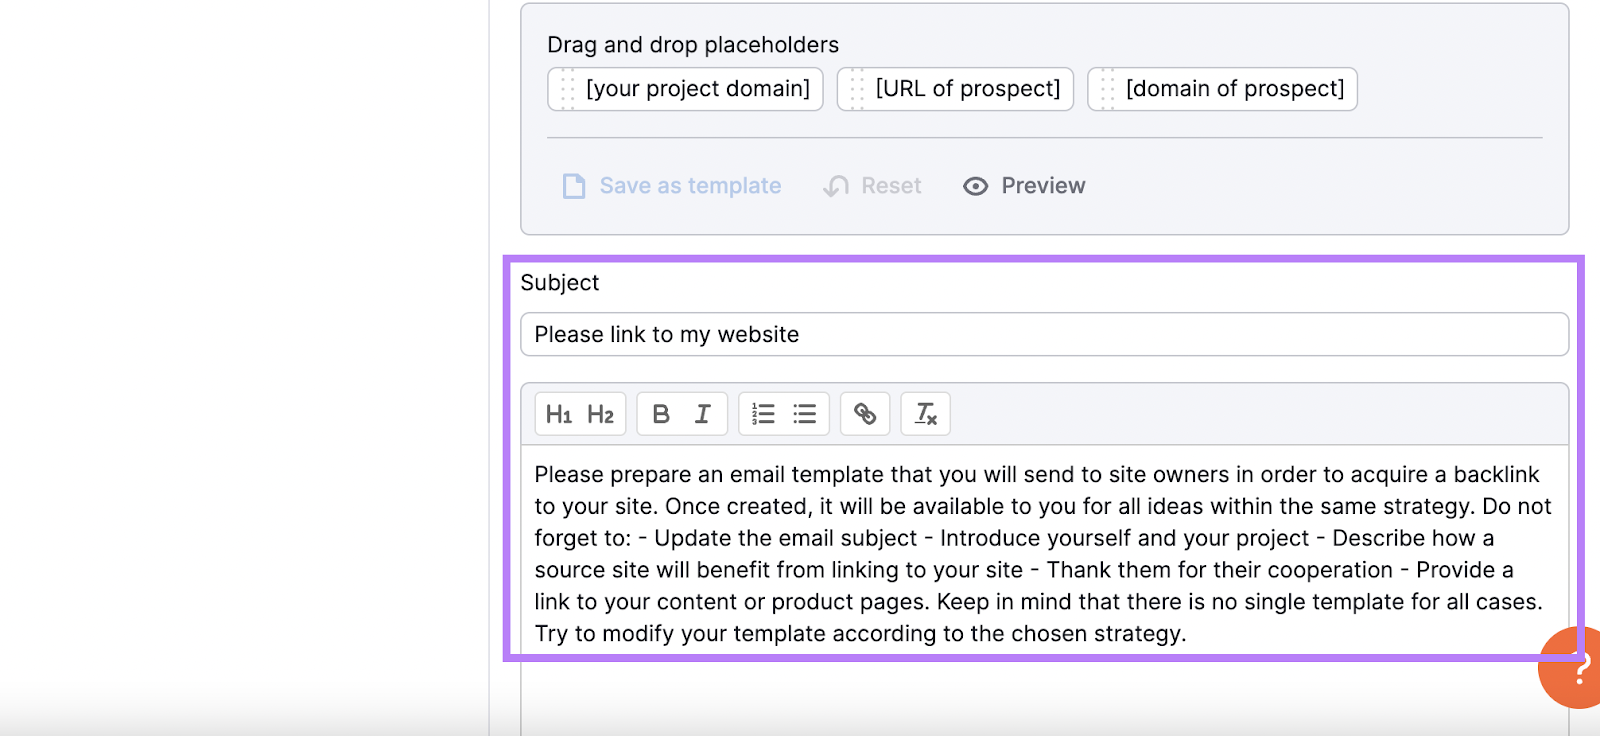 Link Building Tool's outreach email template